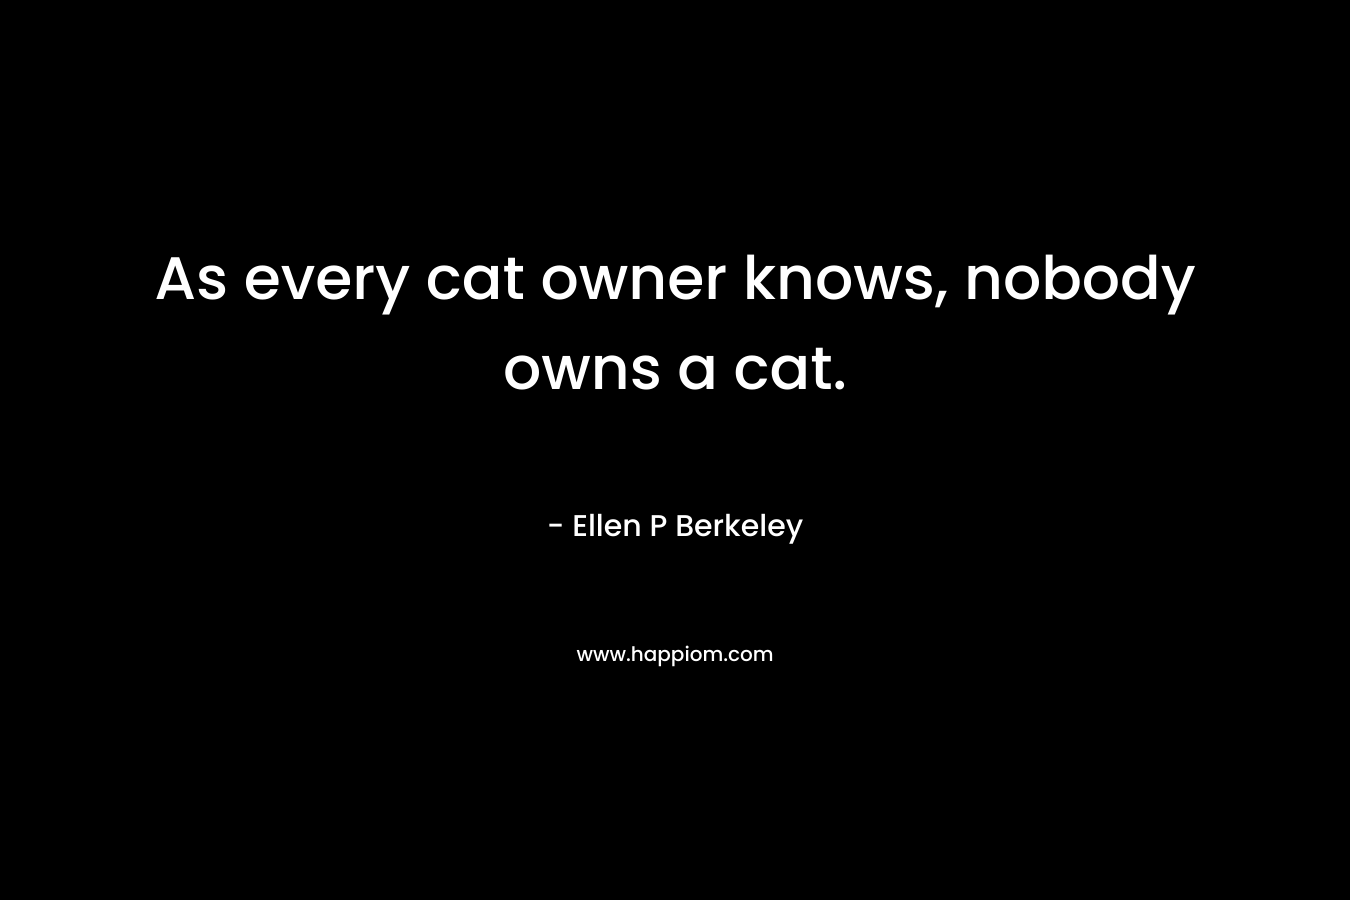 As every cat owner knows, nobody owns a cat. – Ellen P Berkeley